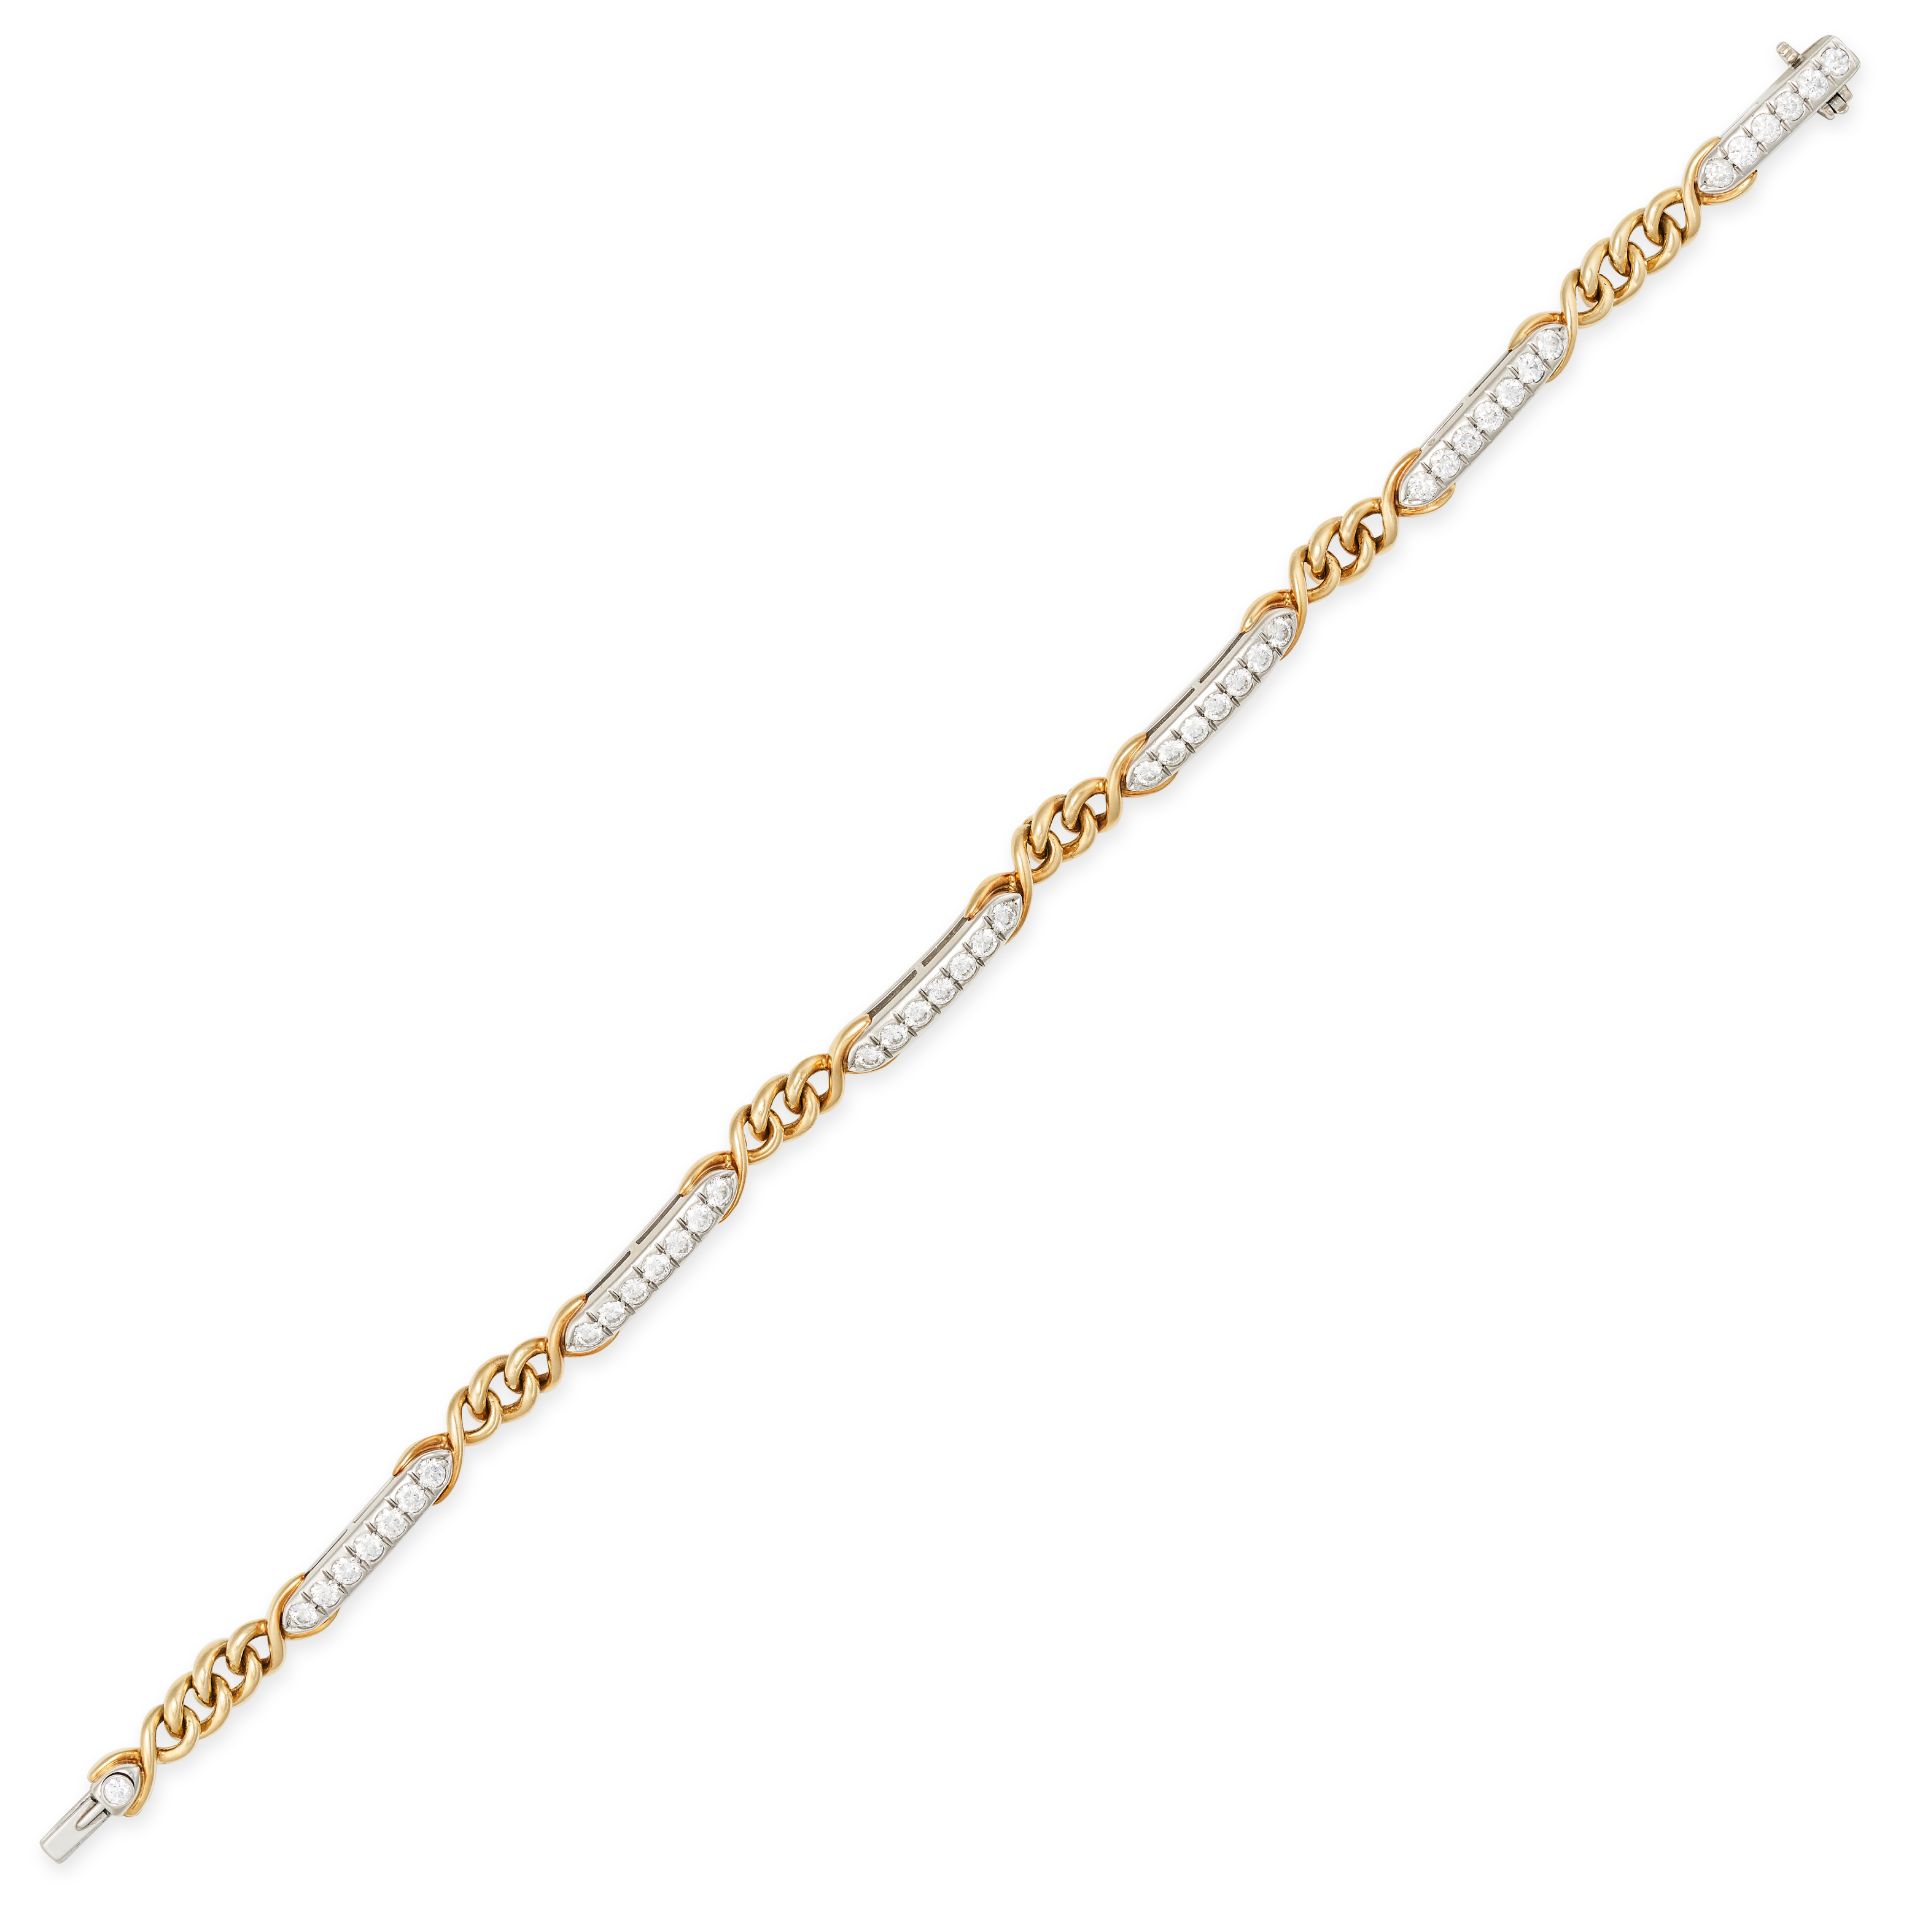 TIFFANY & CO., A DIAMOND BRACELET in platinum and 18ct yellow gold, comprising six rows of round ...